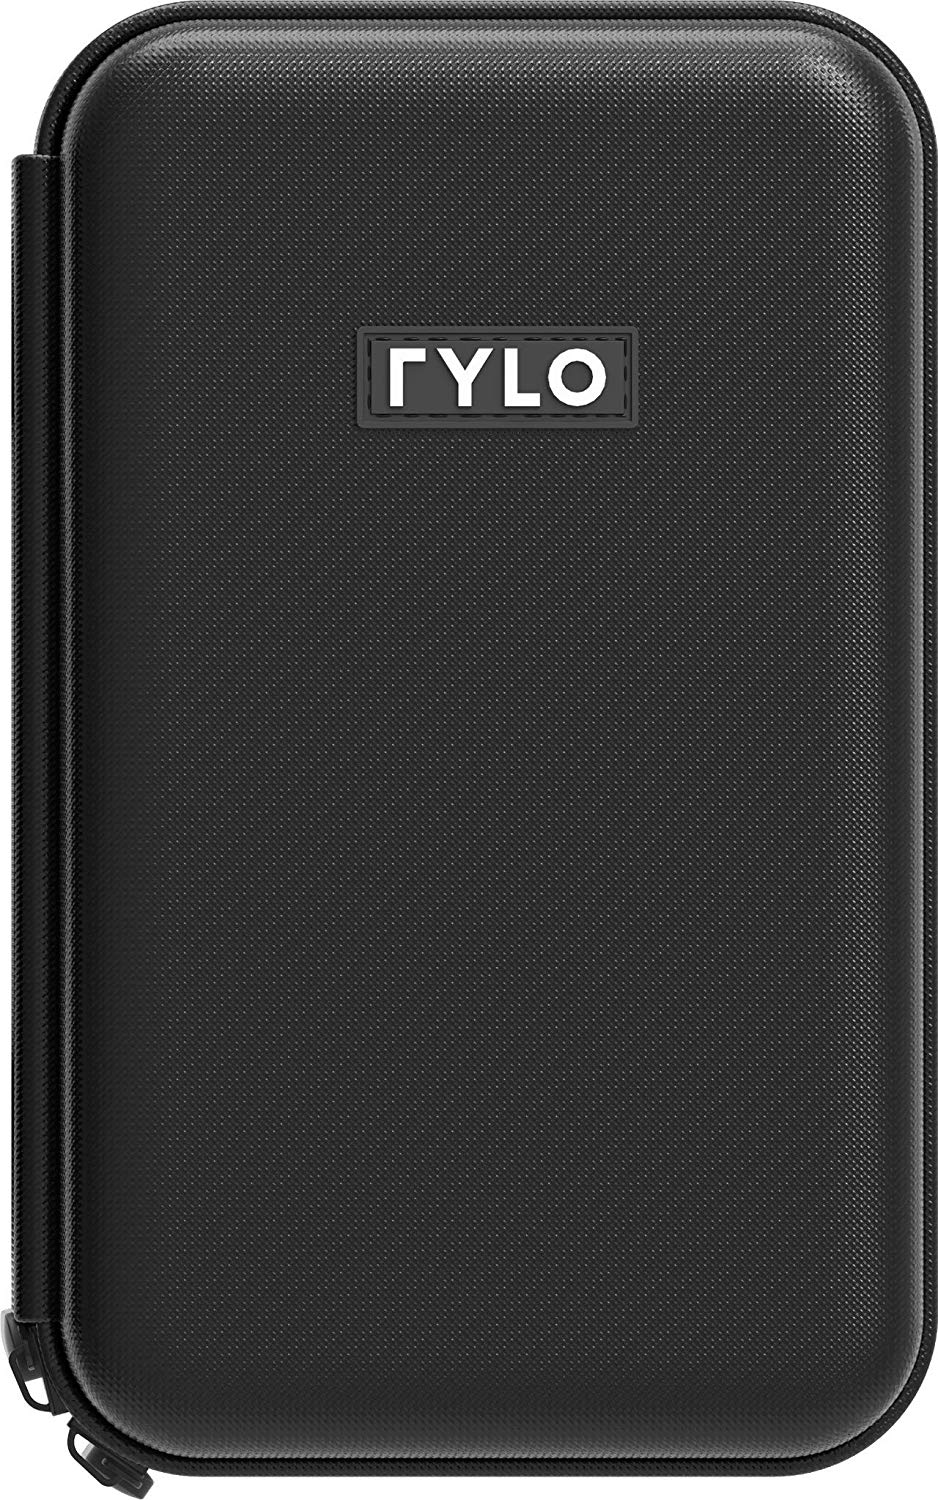 Rylo Carrying Case for 360 Video Camera Carrying Case Camera Case, Black (A0113) 2